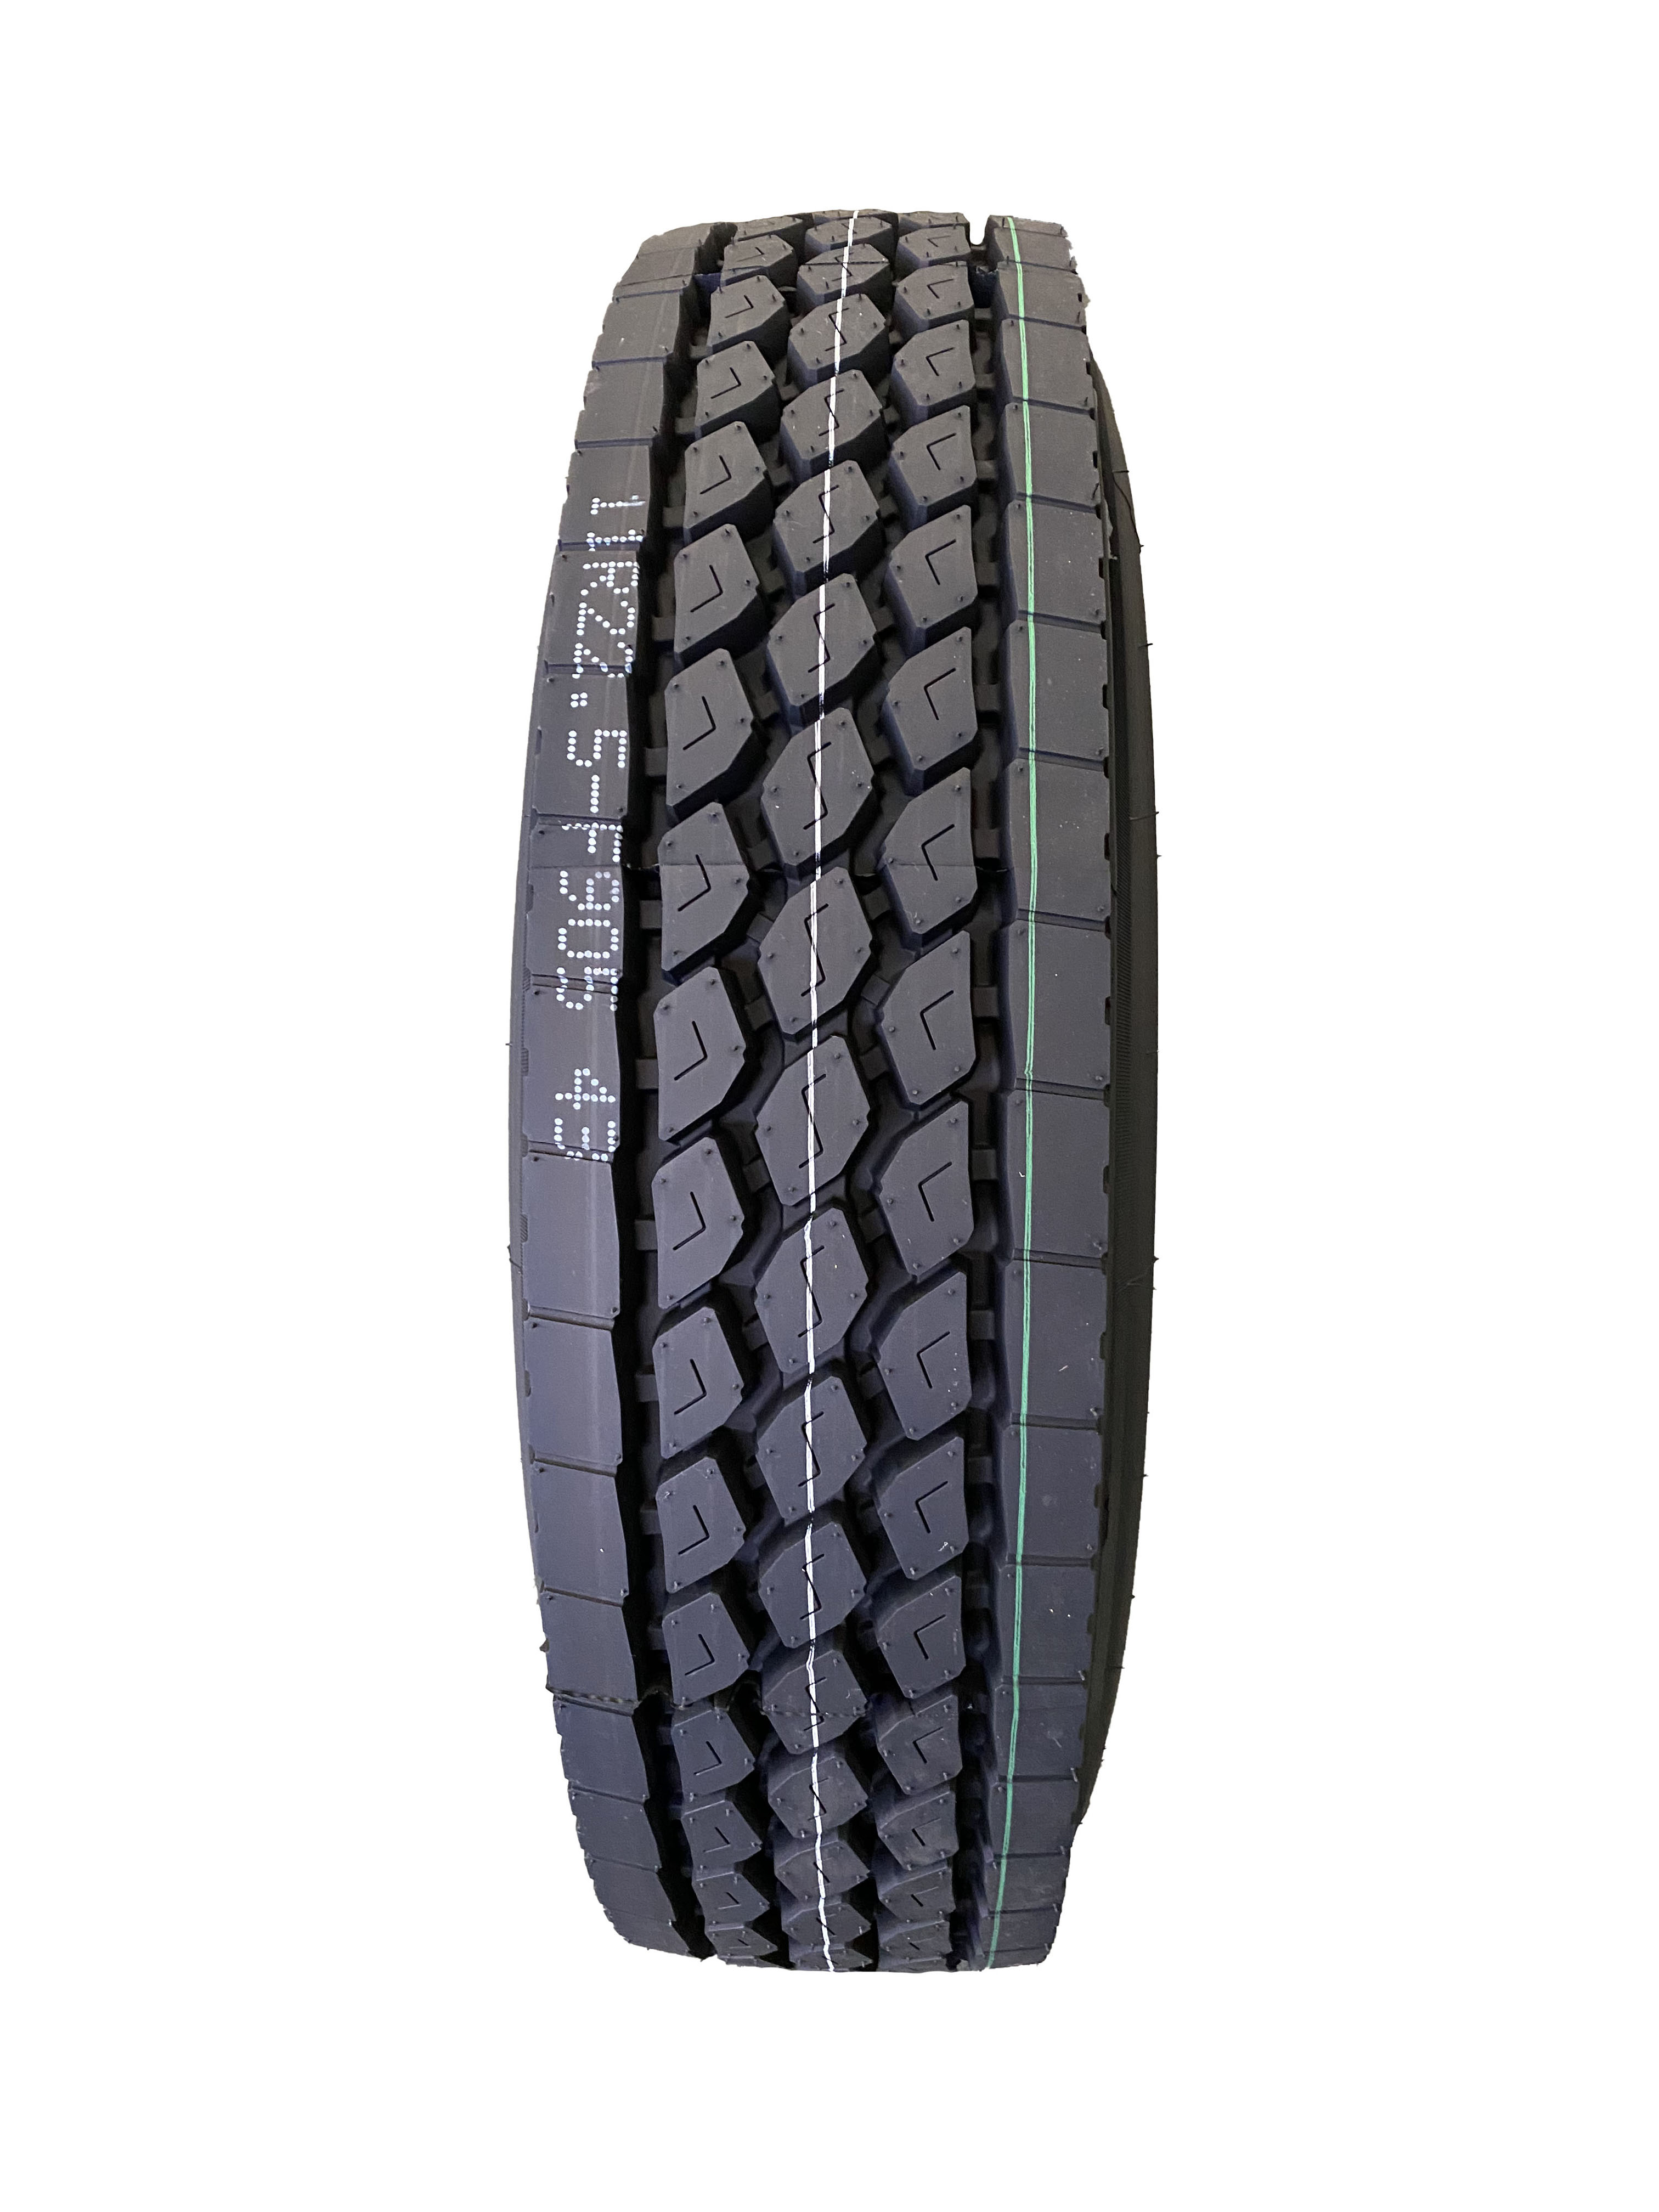 295/75R22.5 BY905